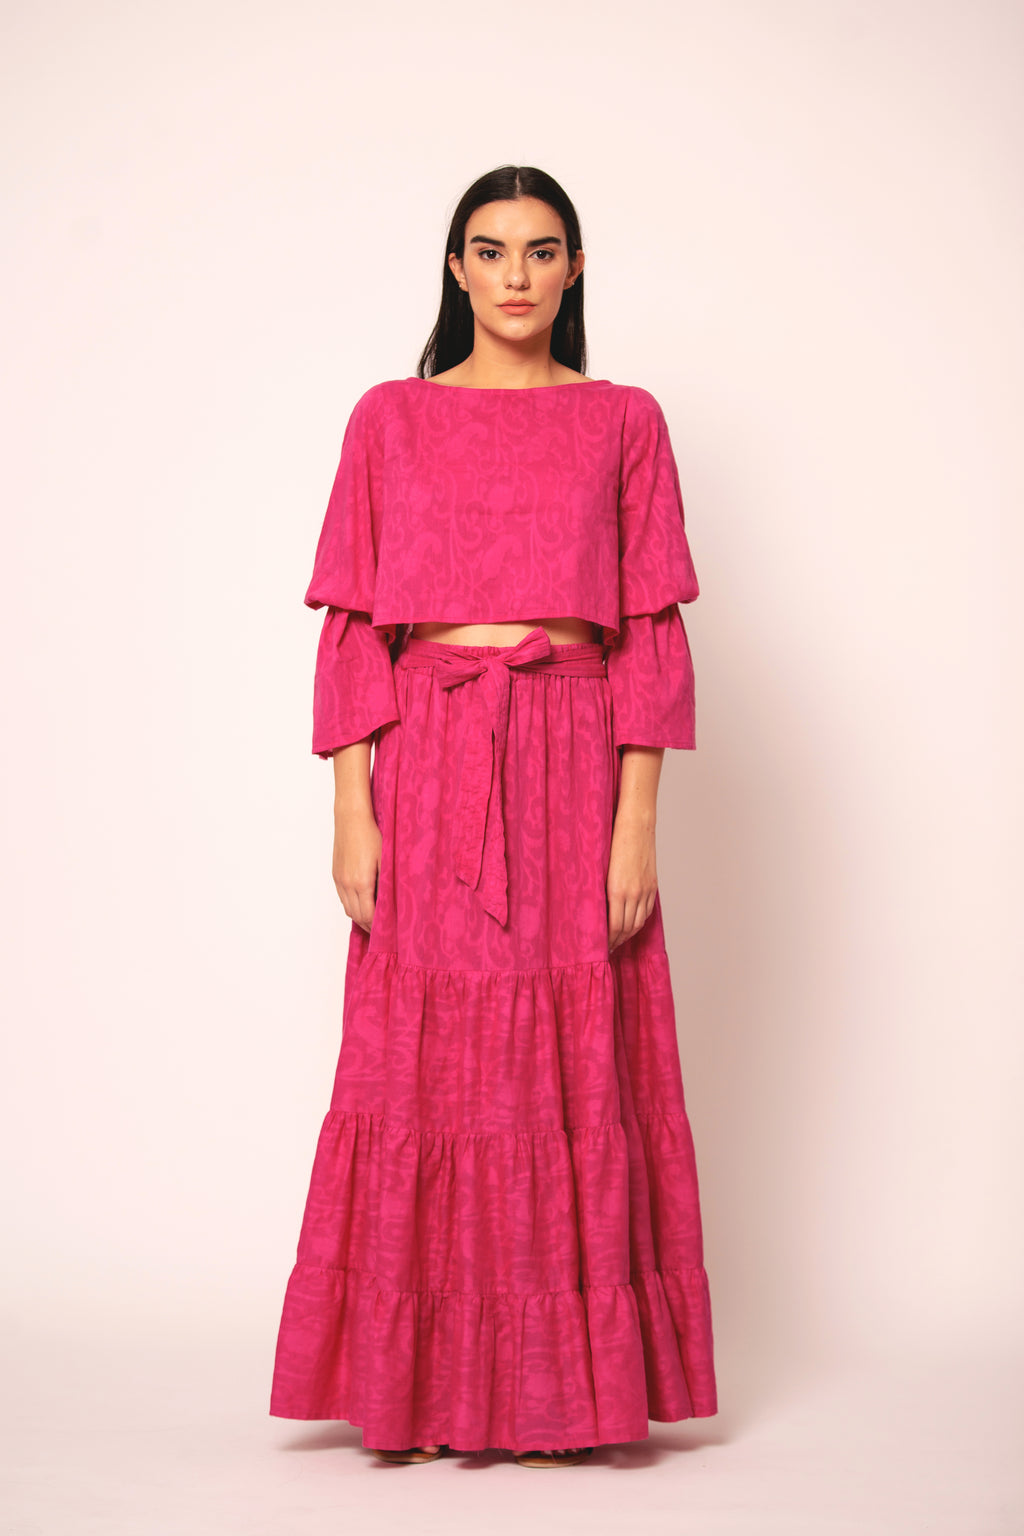 Beyond by Vera Gia Skirt in Pink Jacquard